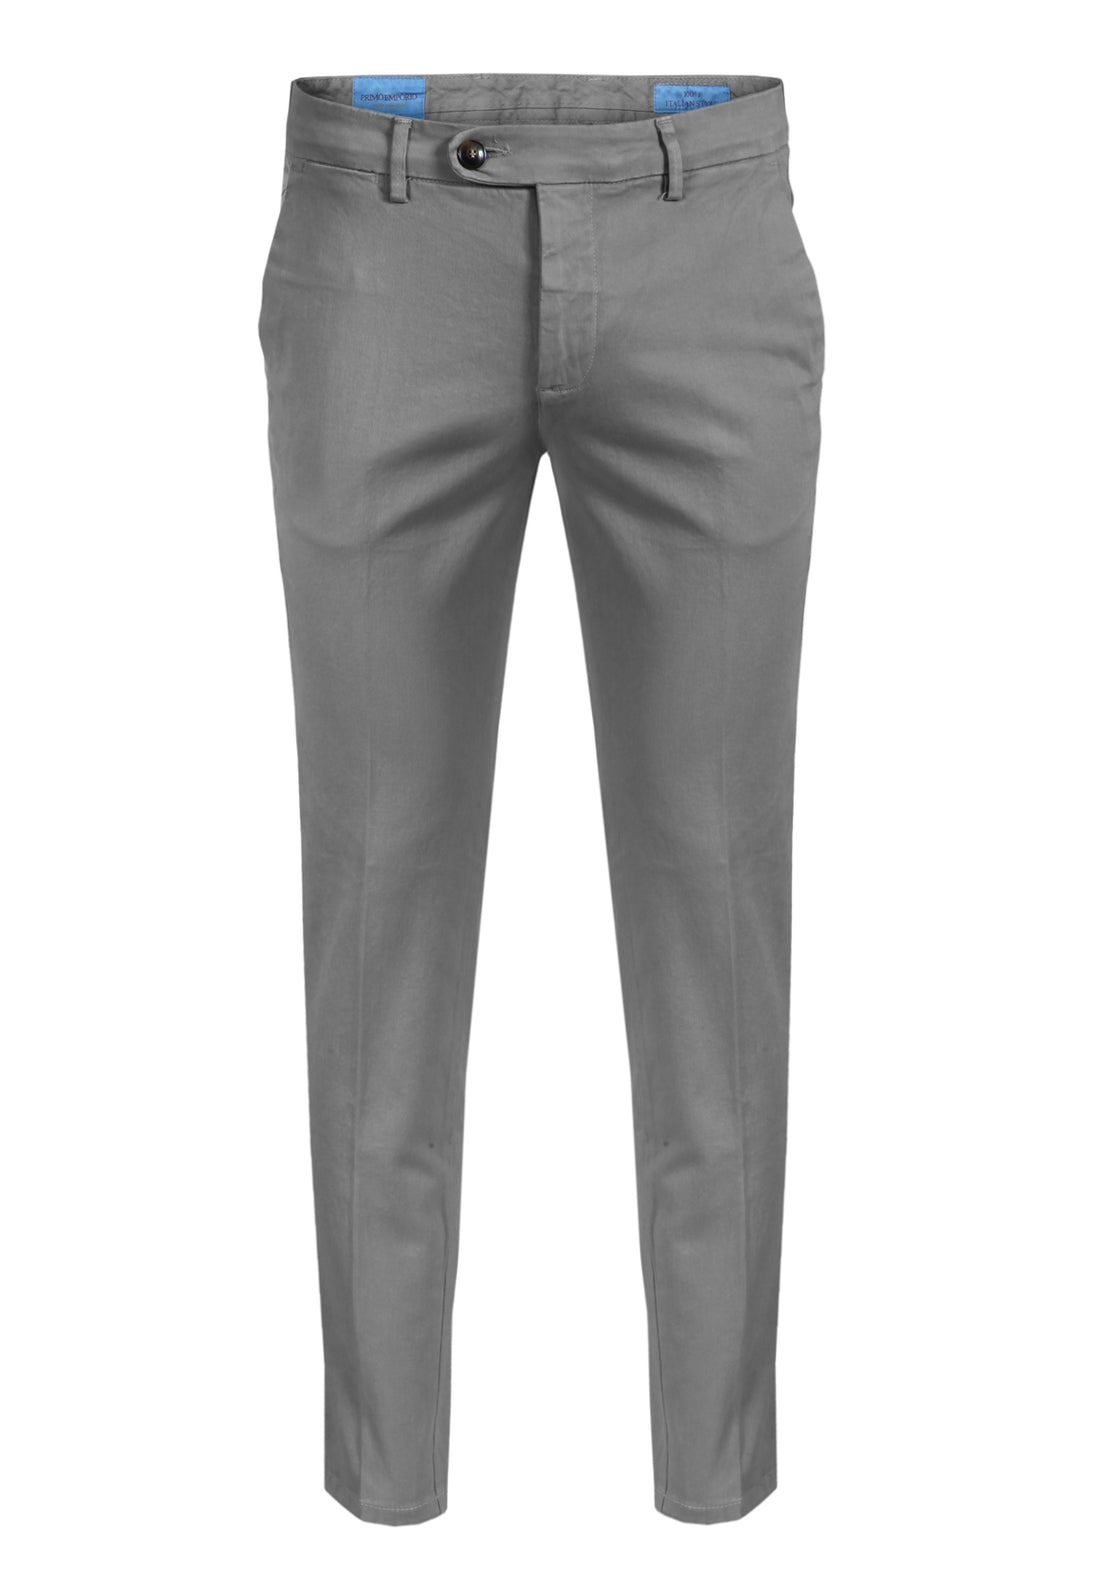 America Pocket Chinos Trousers Warm cotton - Grey